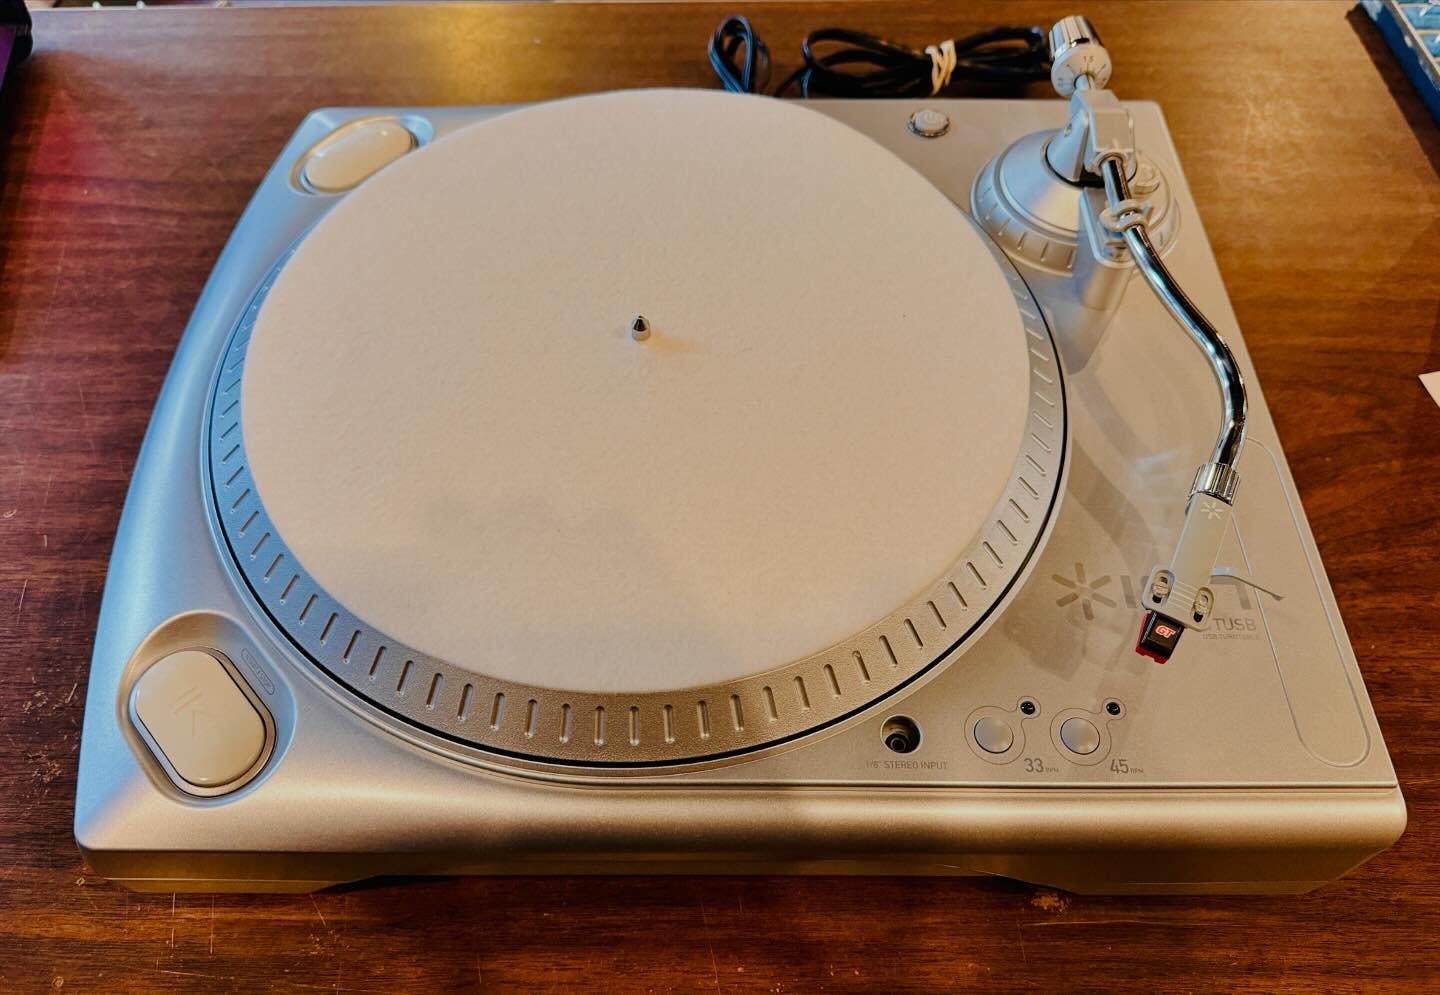 ION &ldquo;TT-USB&rdquo; turntable. New! Tested and works great. No box. $45
#fatrabbitky